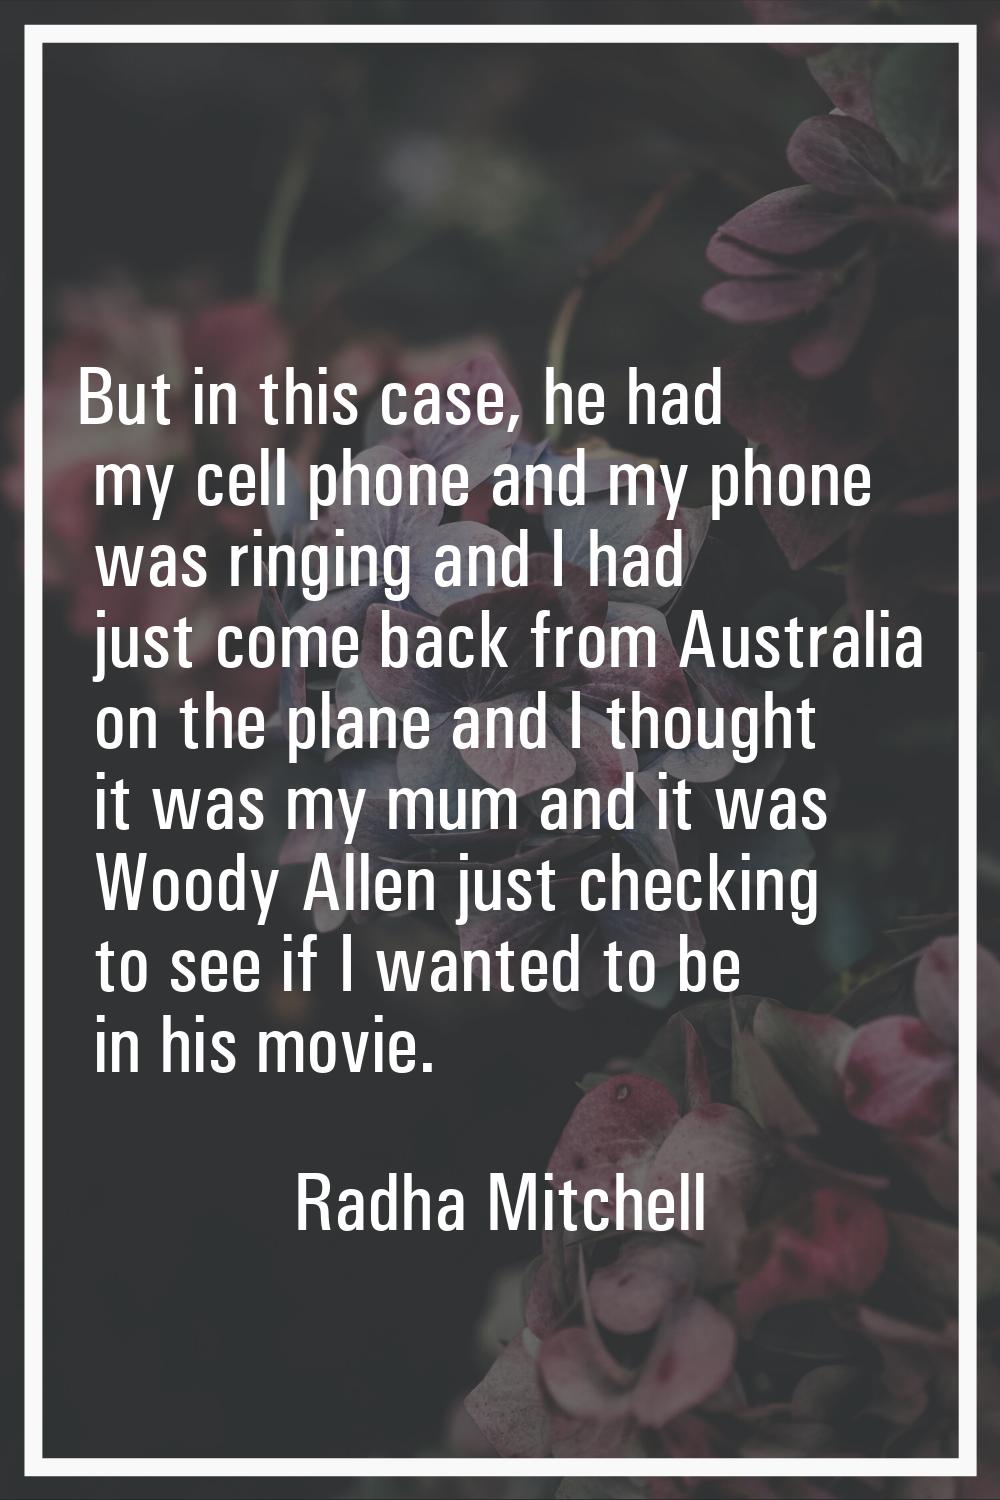 But in this case, he had my cell phone and my phone was ringing and I had just come back from Austr